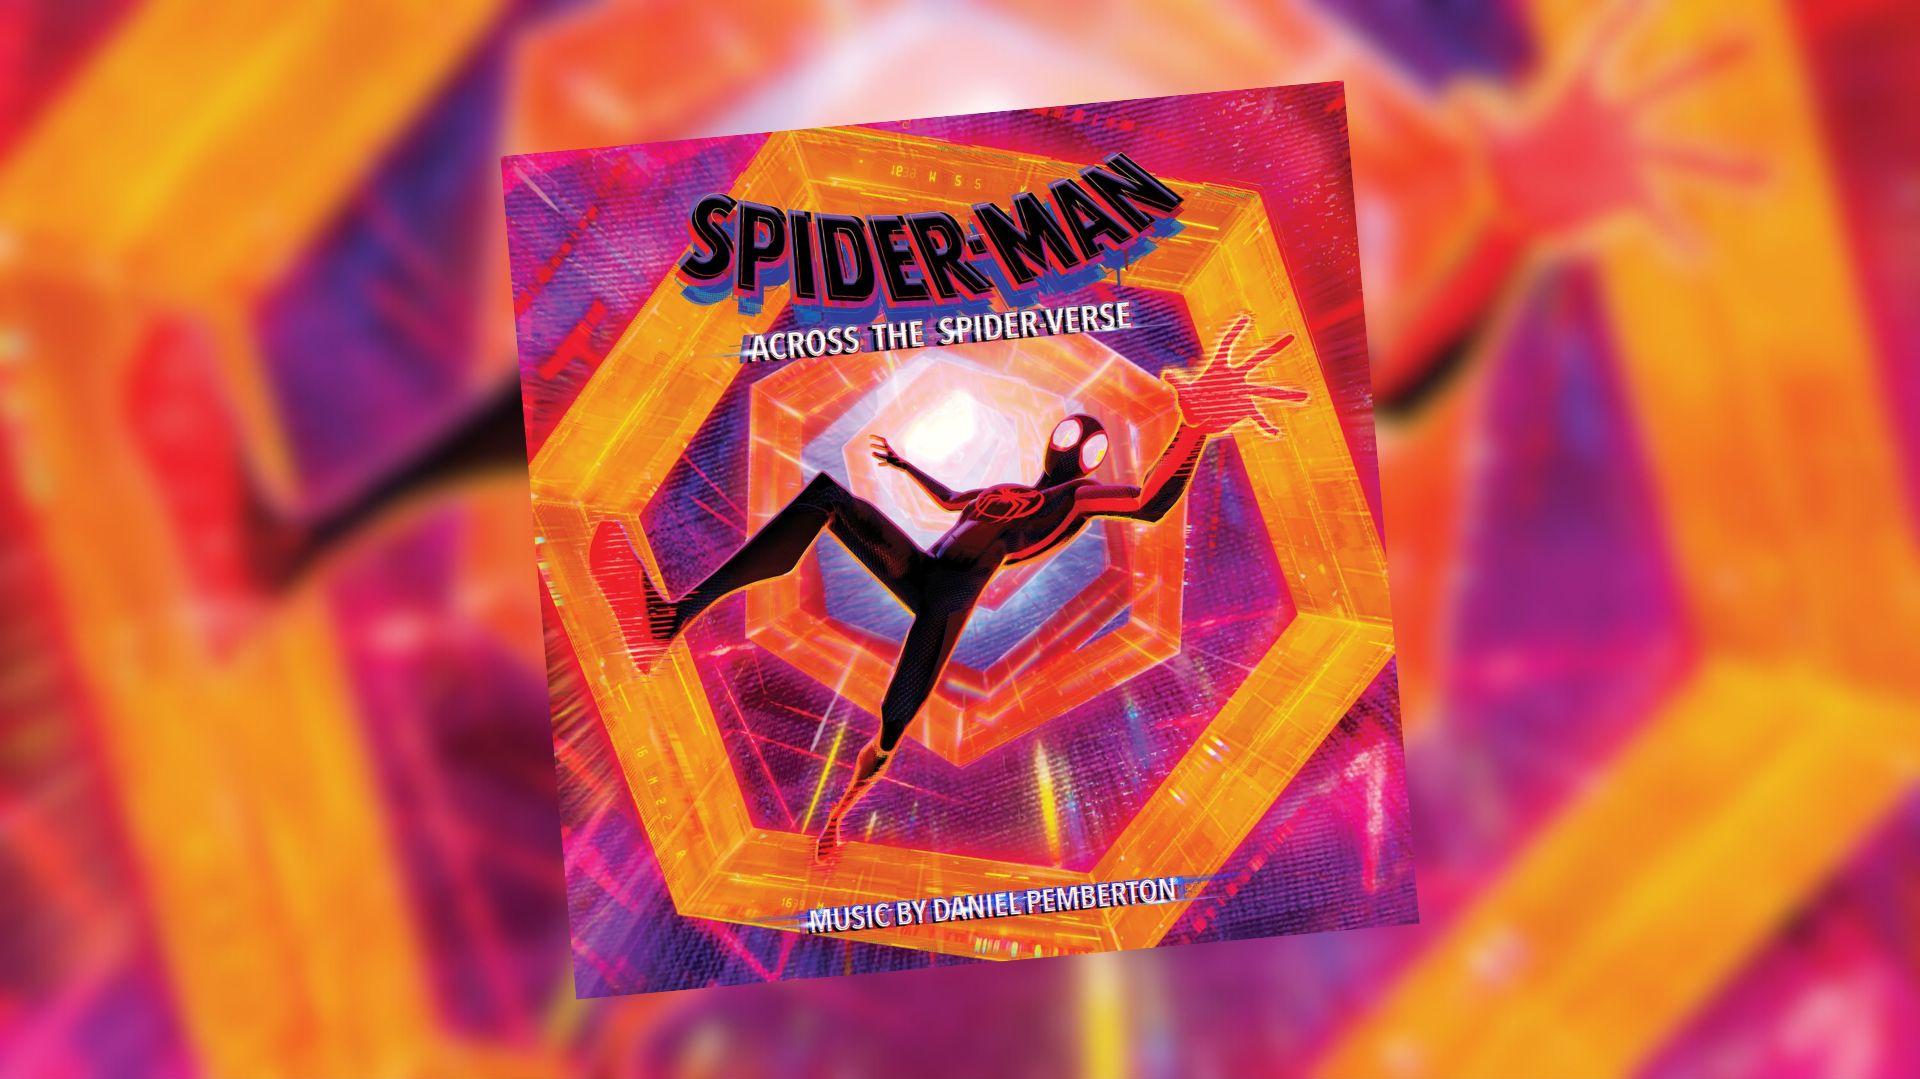 Spider Man Across The Verse Soundtrack Vinyl Is Up For